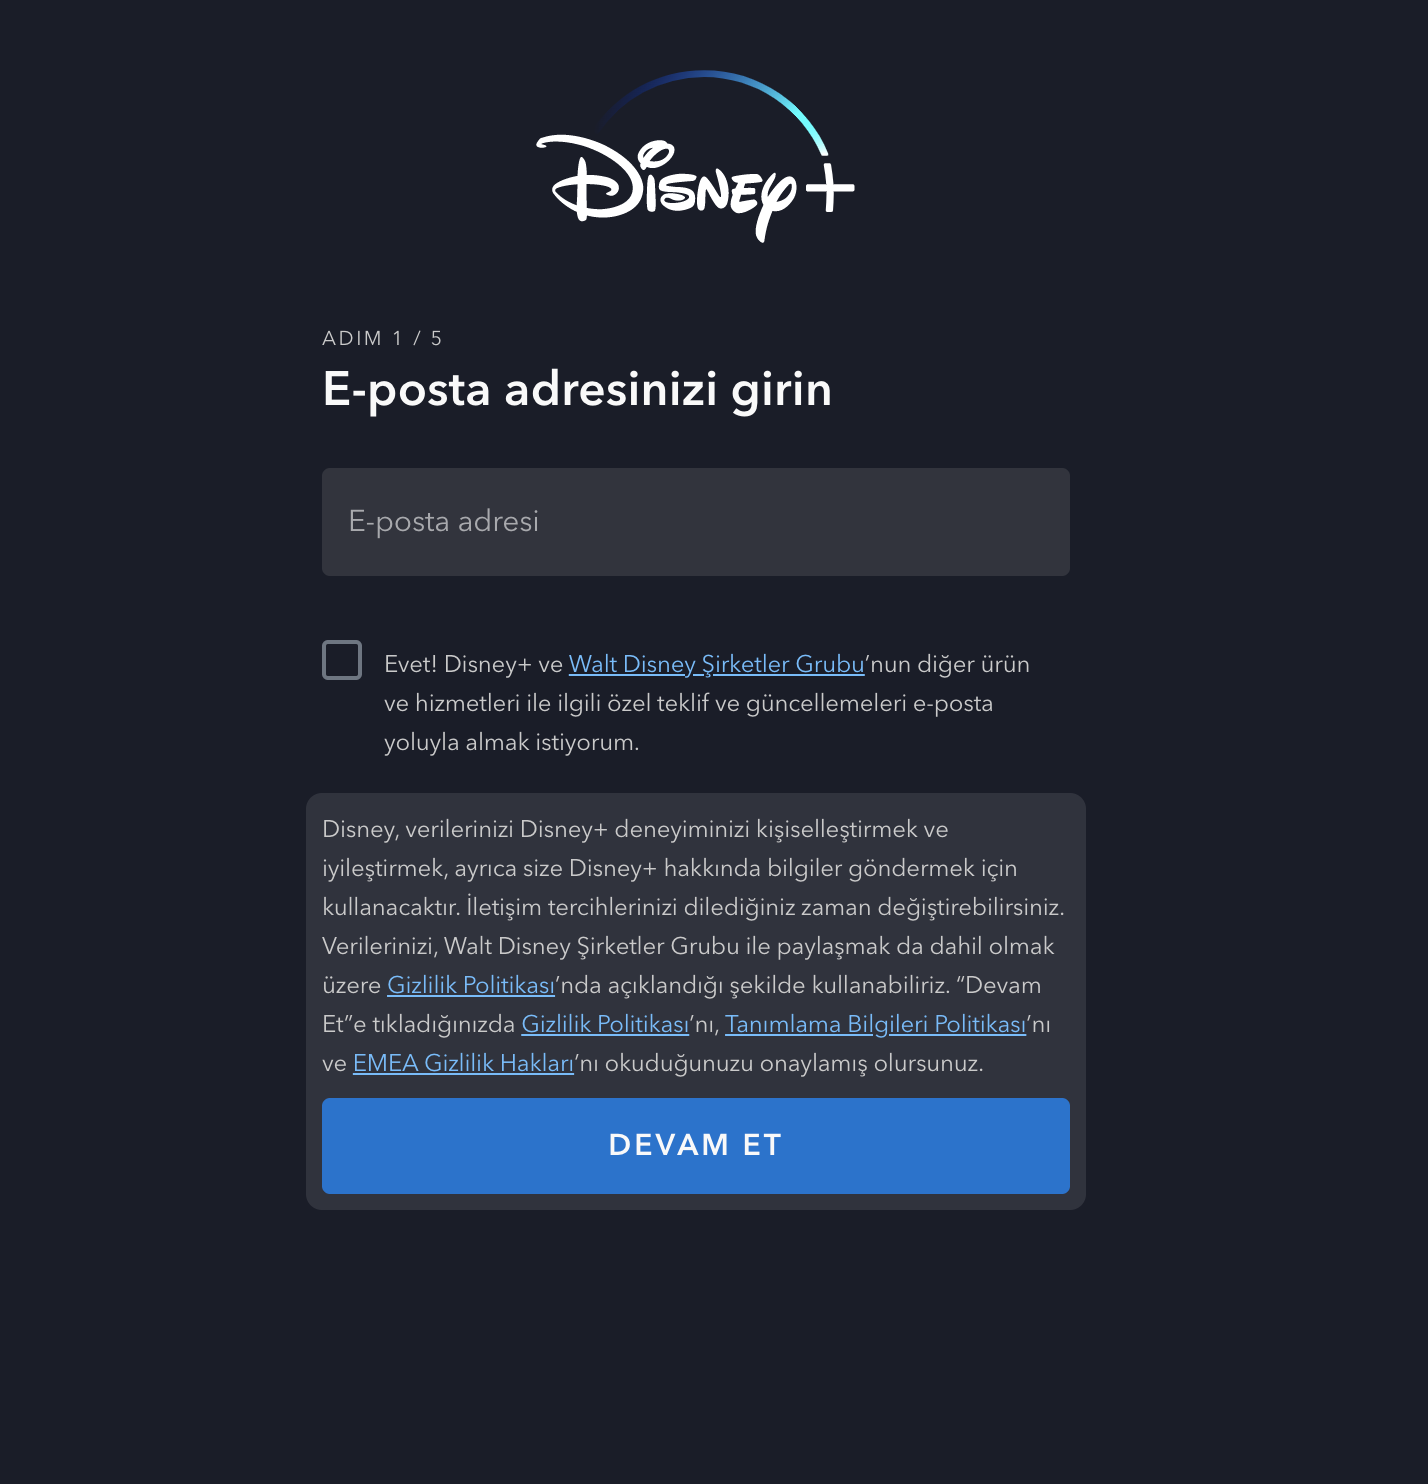 Subscribe to Disney+